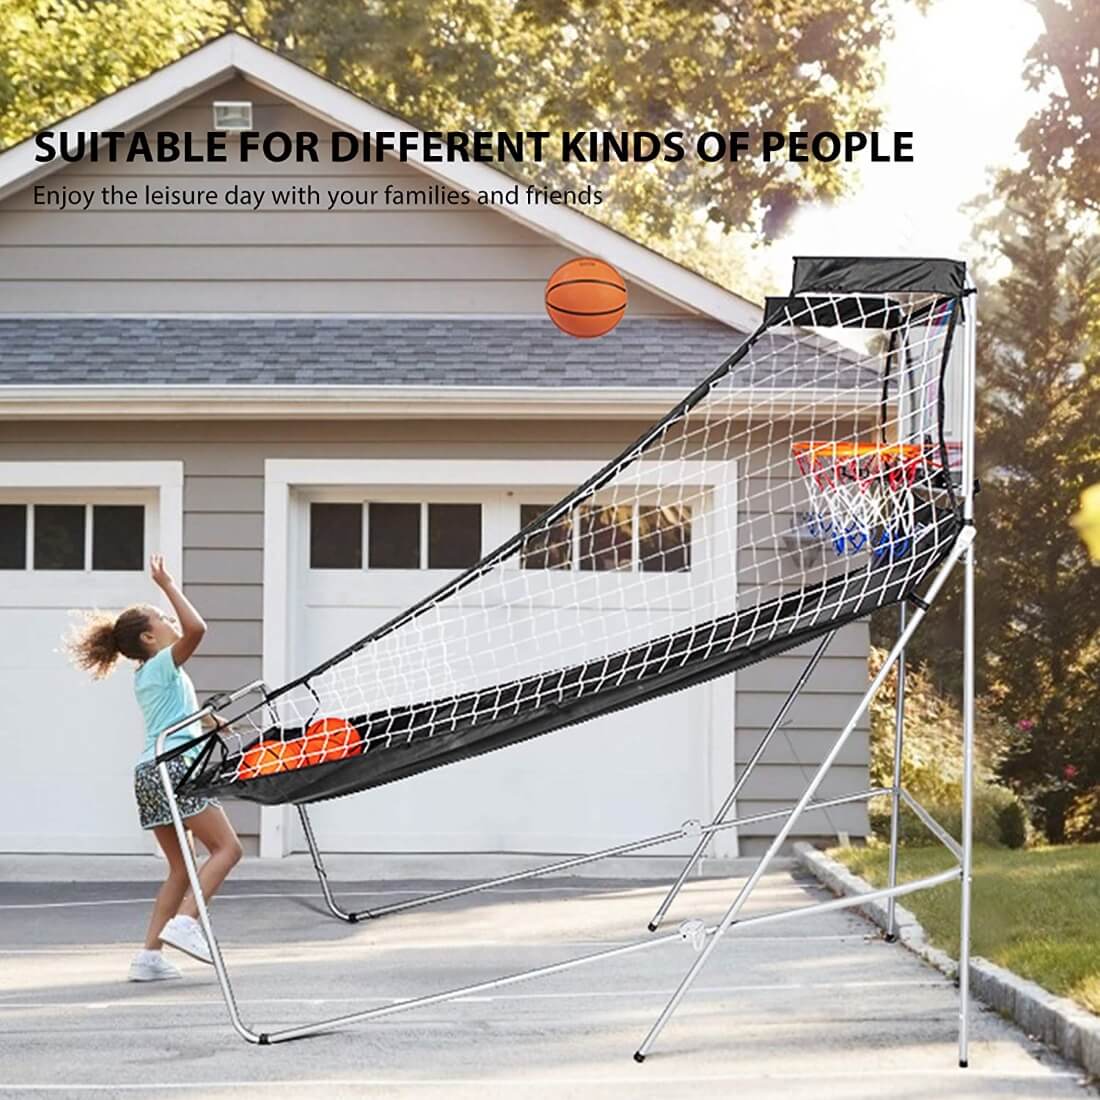 Outdoor Basketball Arcade Game Double Electronic Hoops Shot 2 Player Games